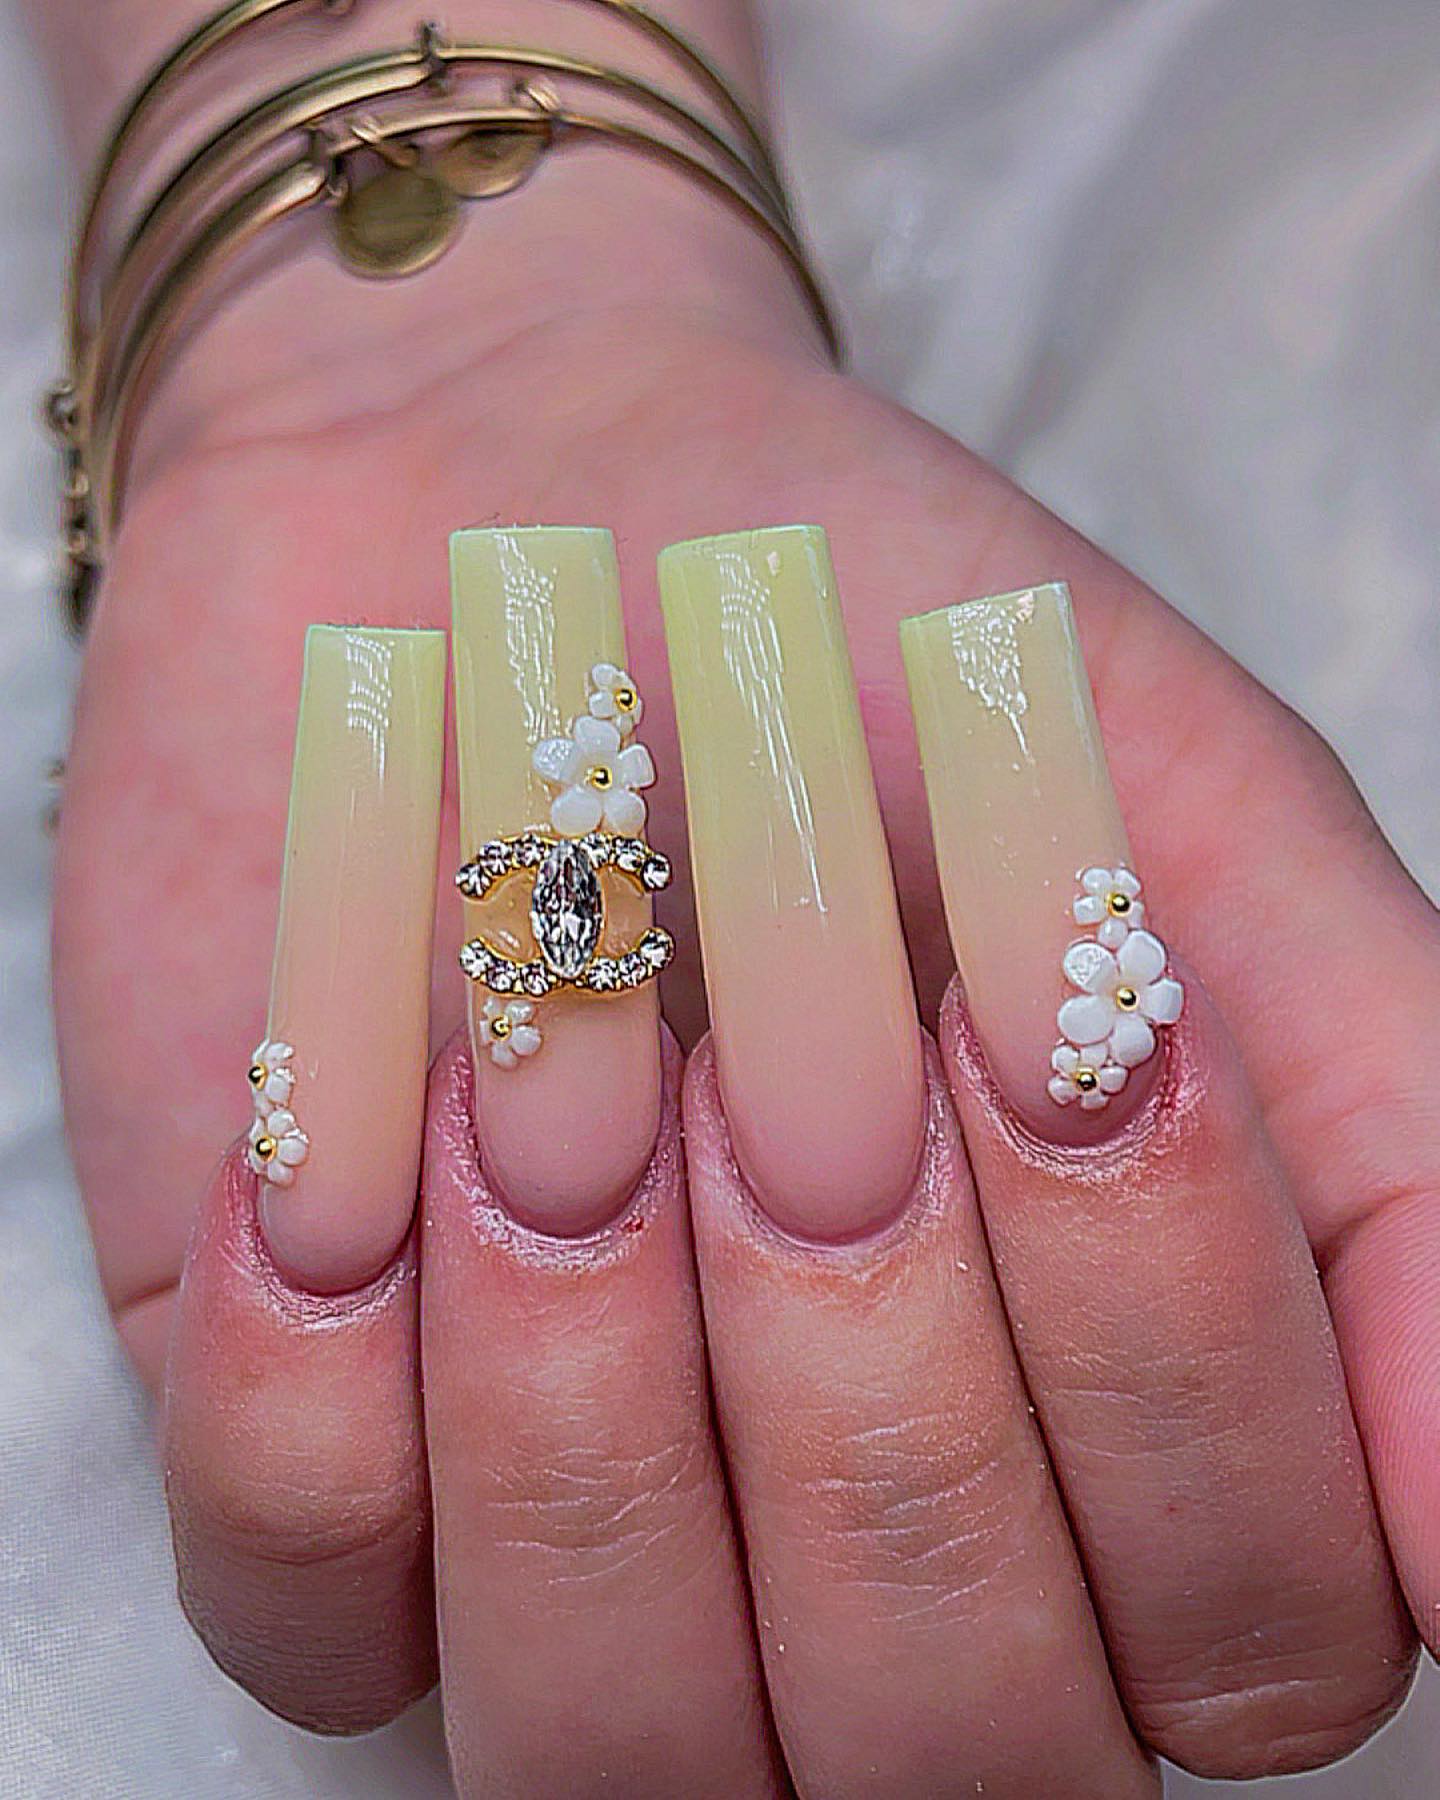 If you trust your nail artist and they can pull off an ombré mani boo this design!